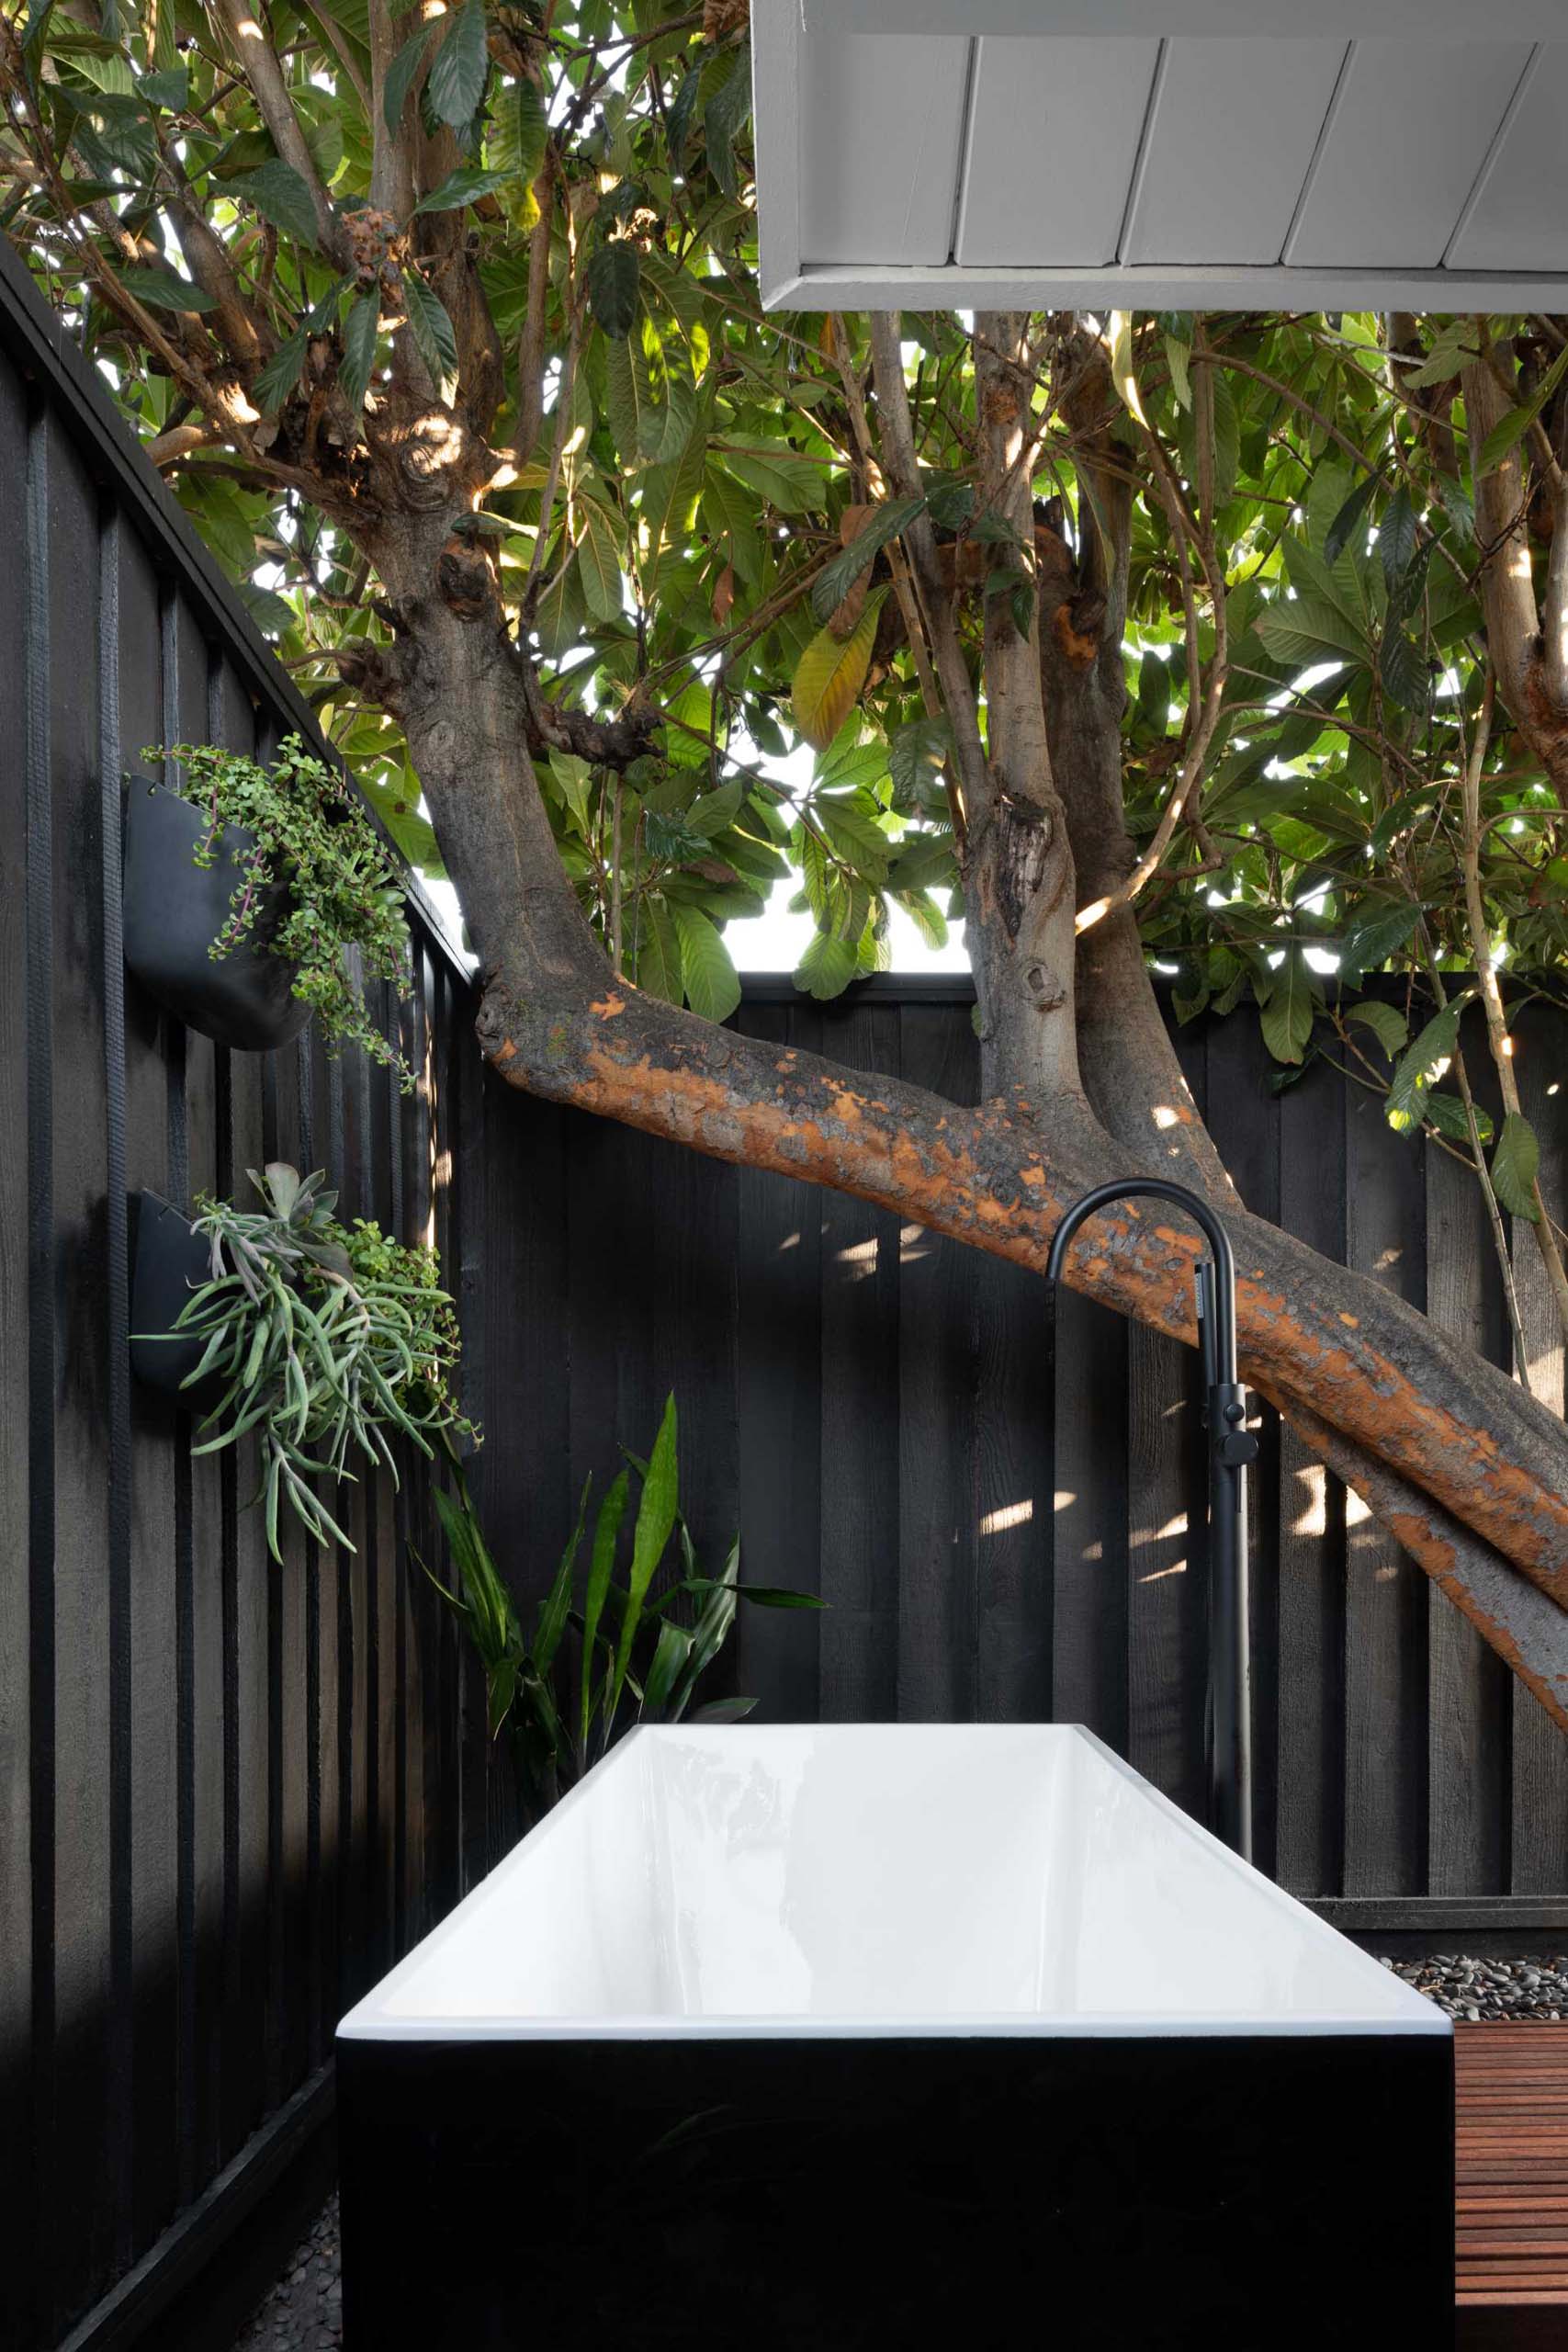 A modern outdoor bathtub surrounded by a tall black fence and plants.